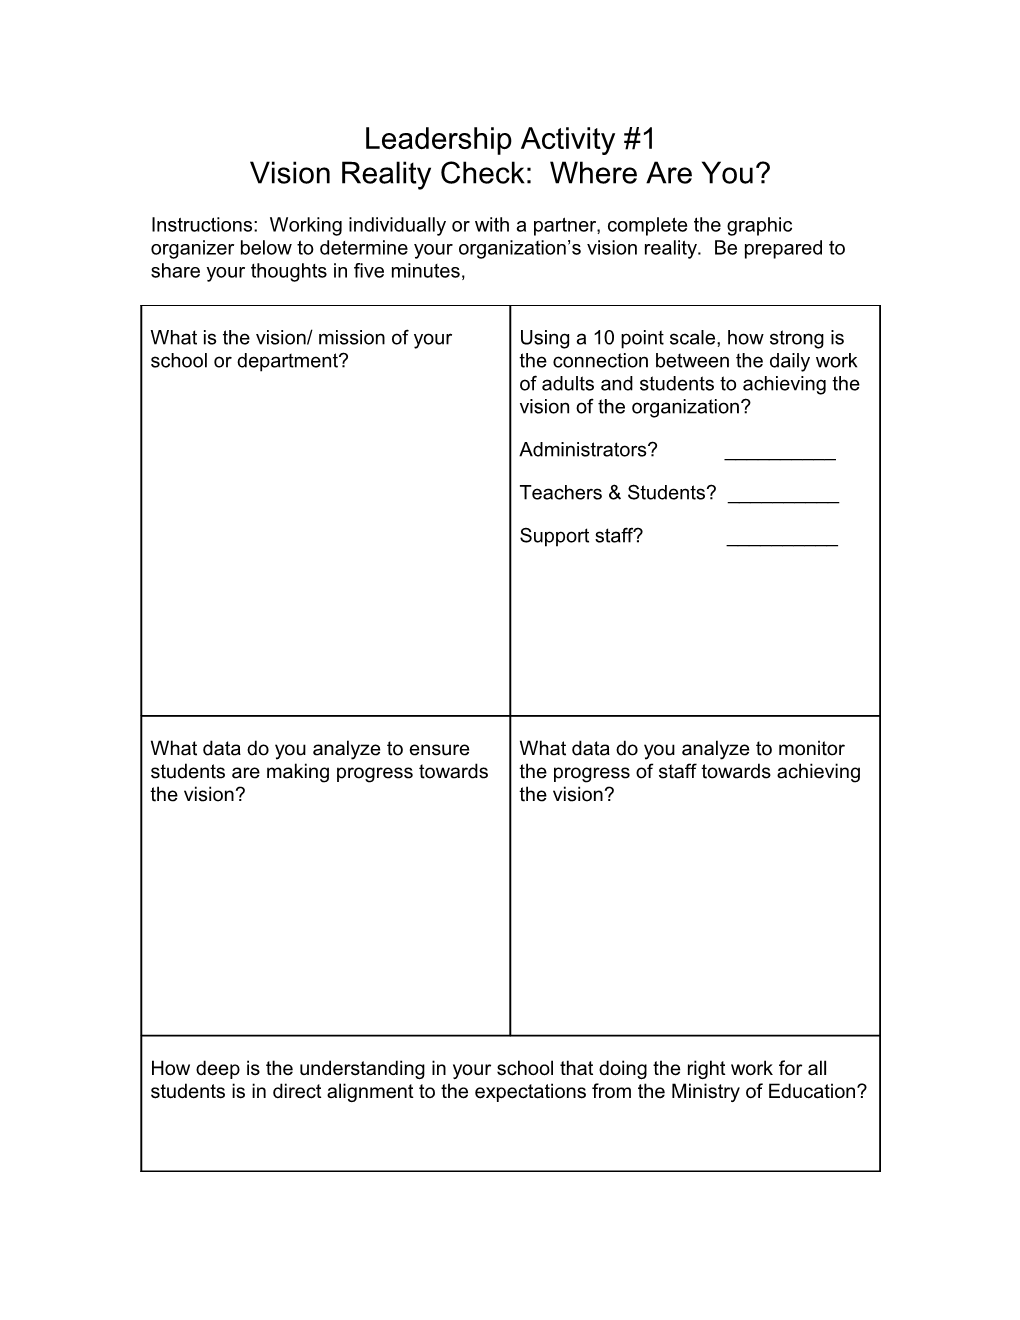 Vision Reality Check: Where Are You?